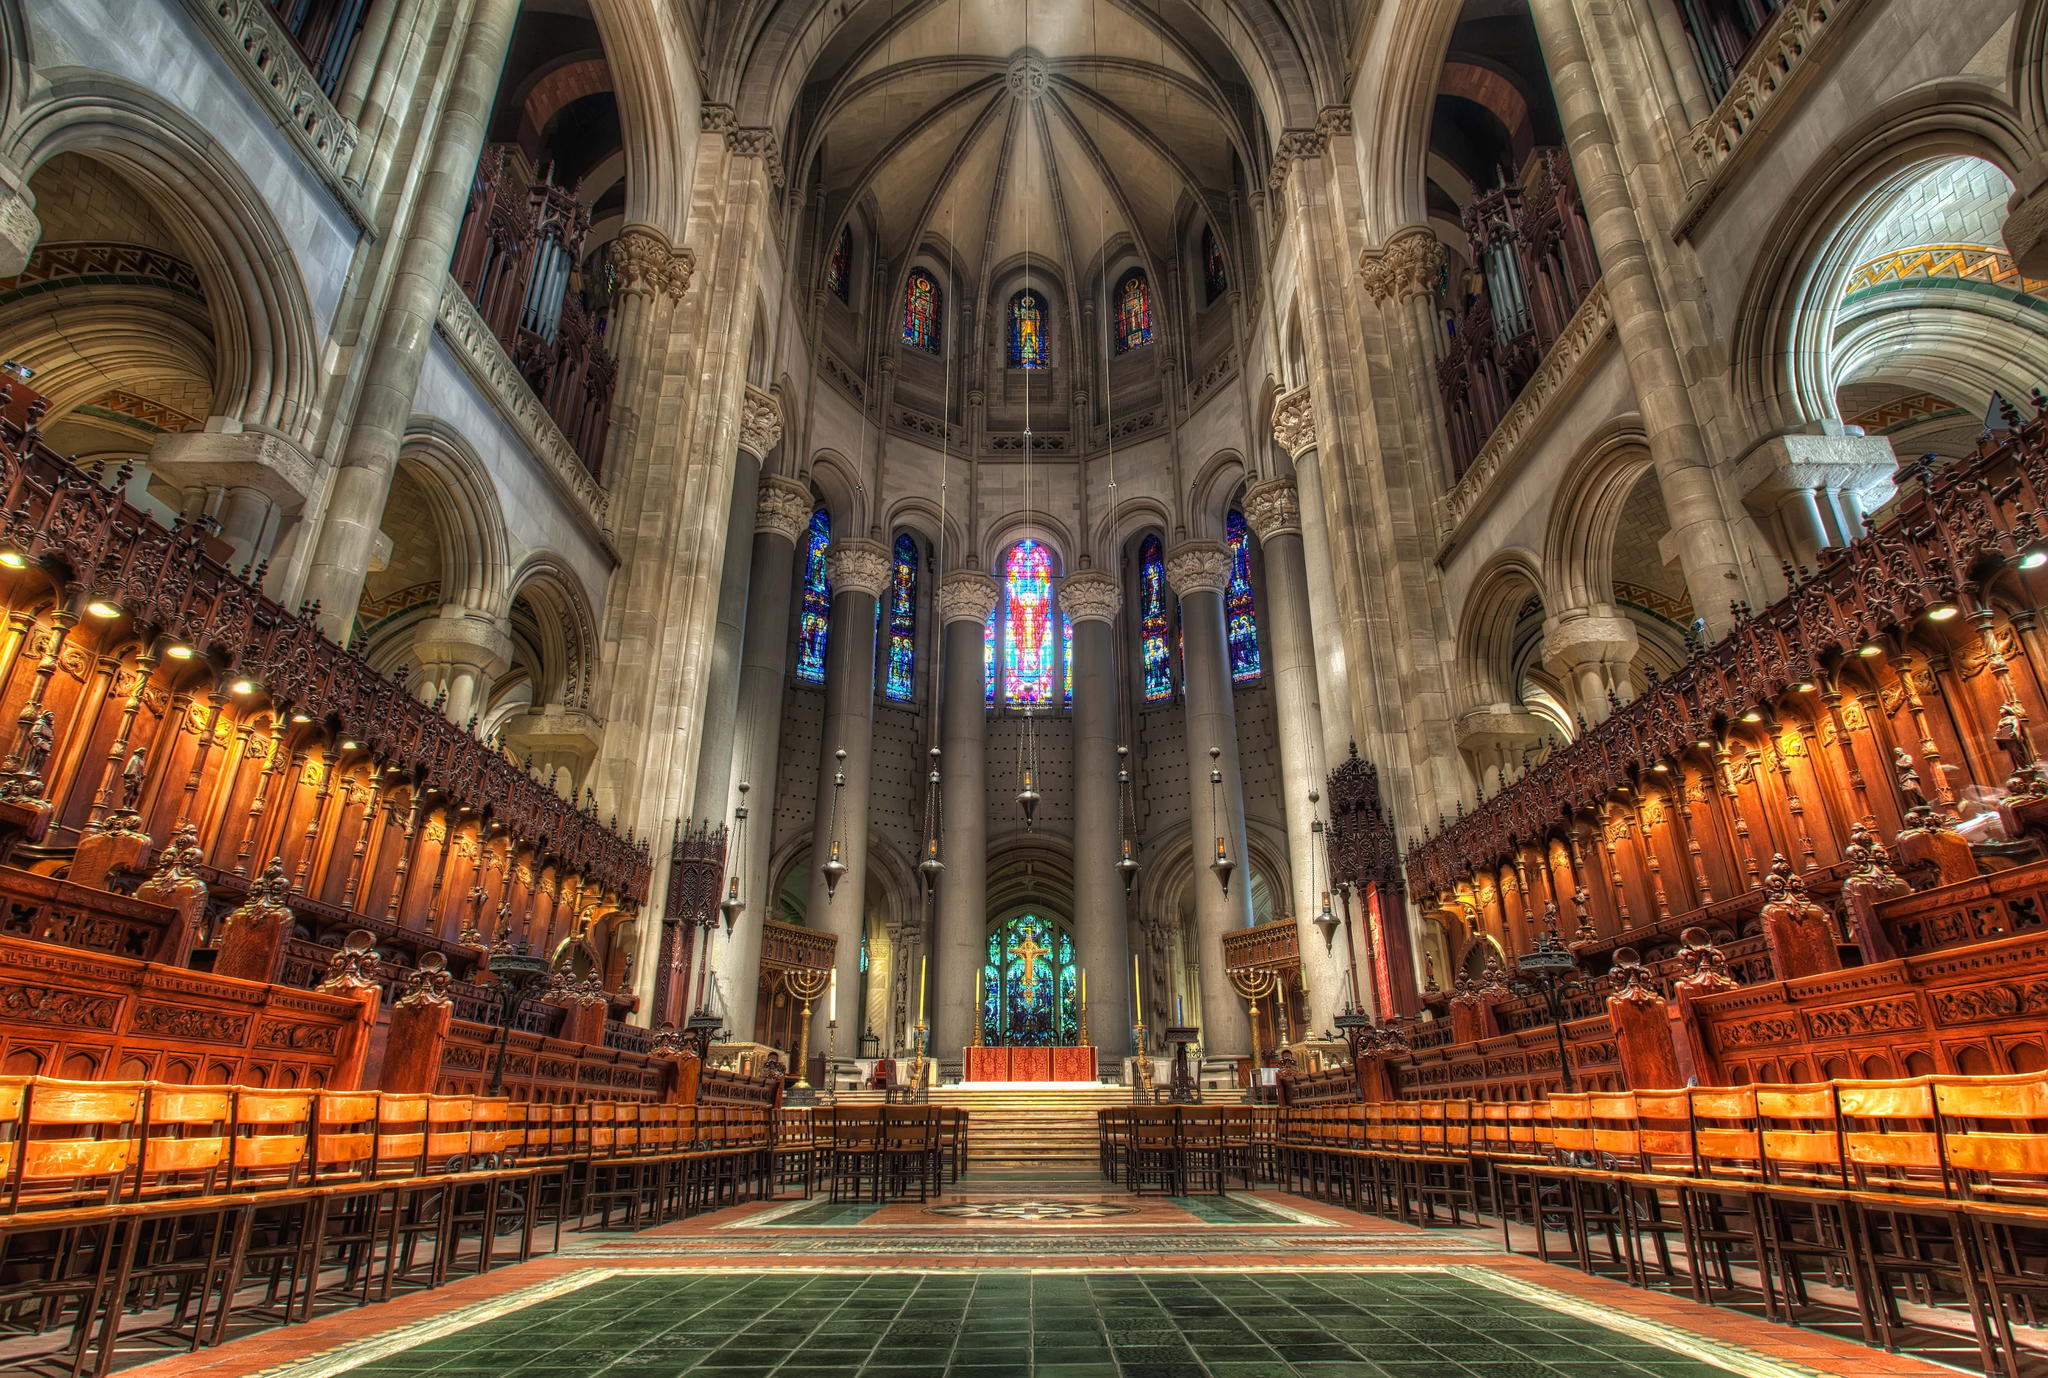 files/images/blog-images/10 Great Sites NYC/5-cathedral-of-st.-john.jpg